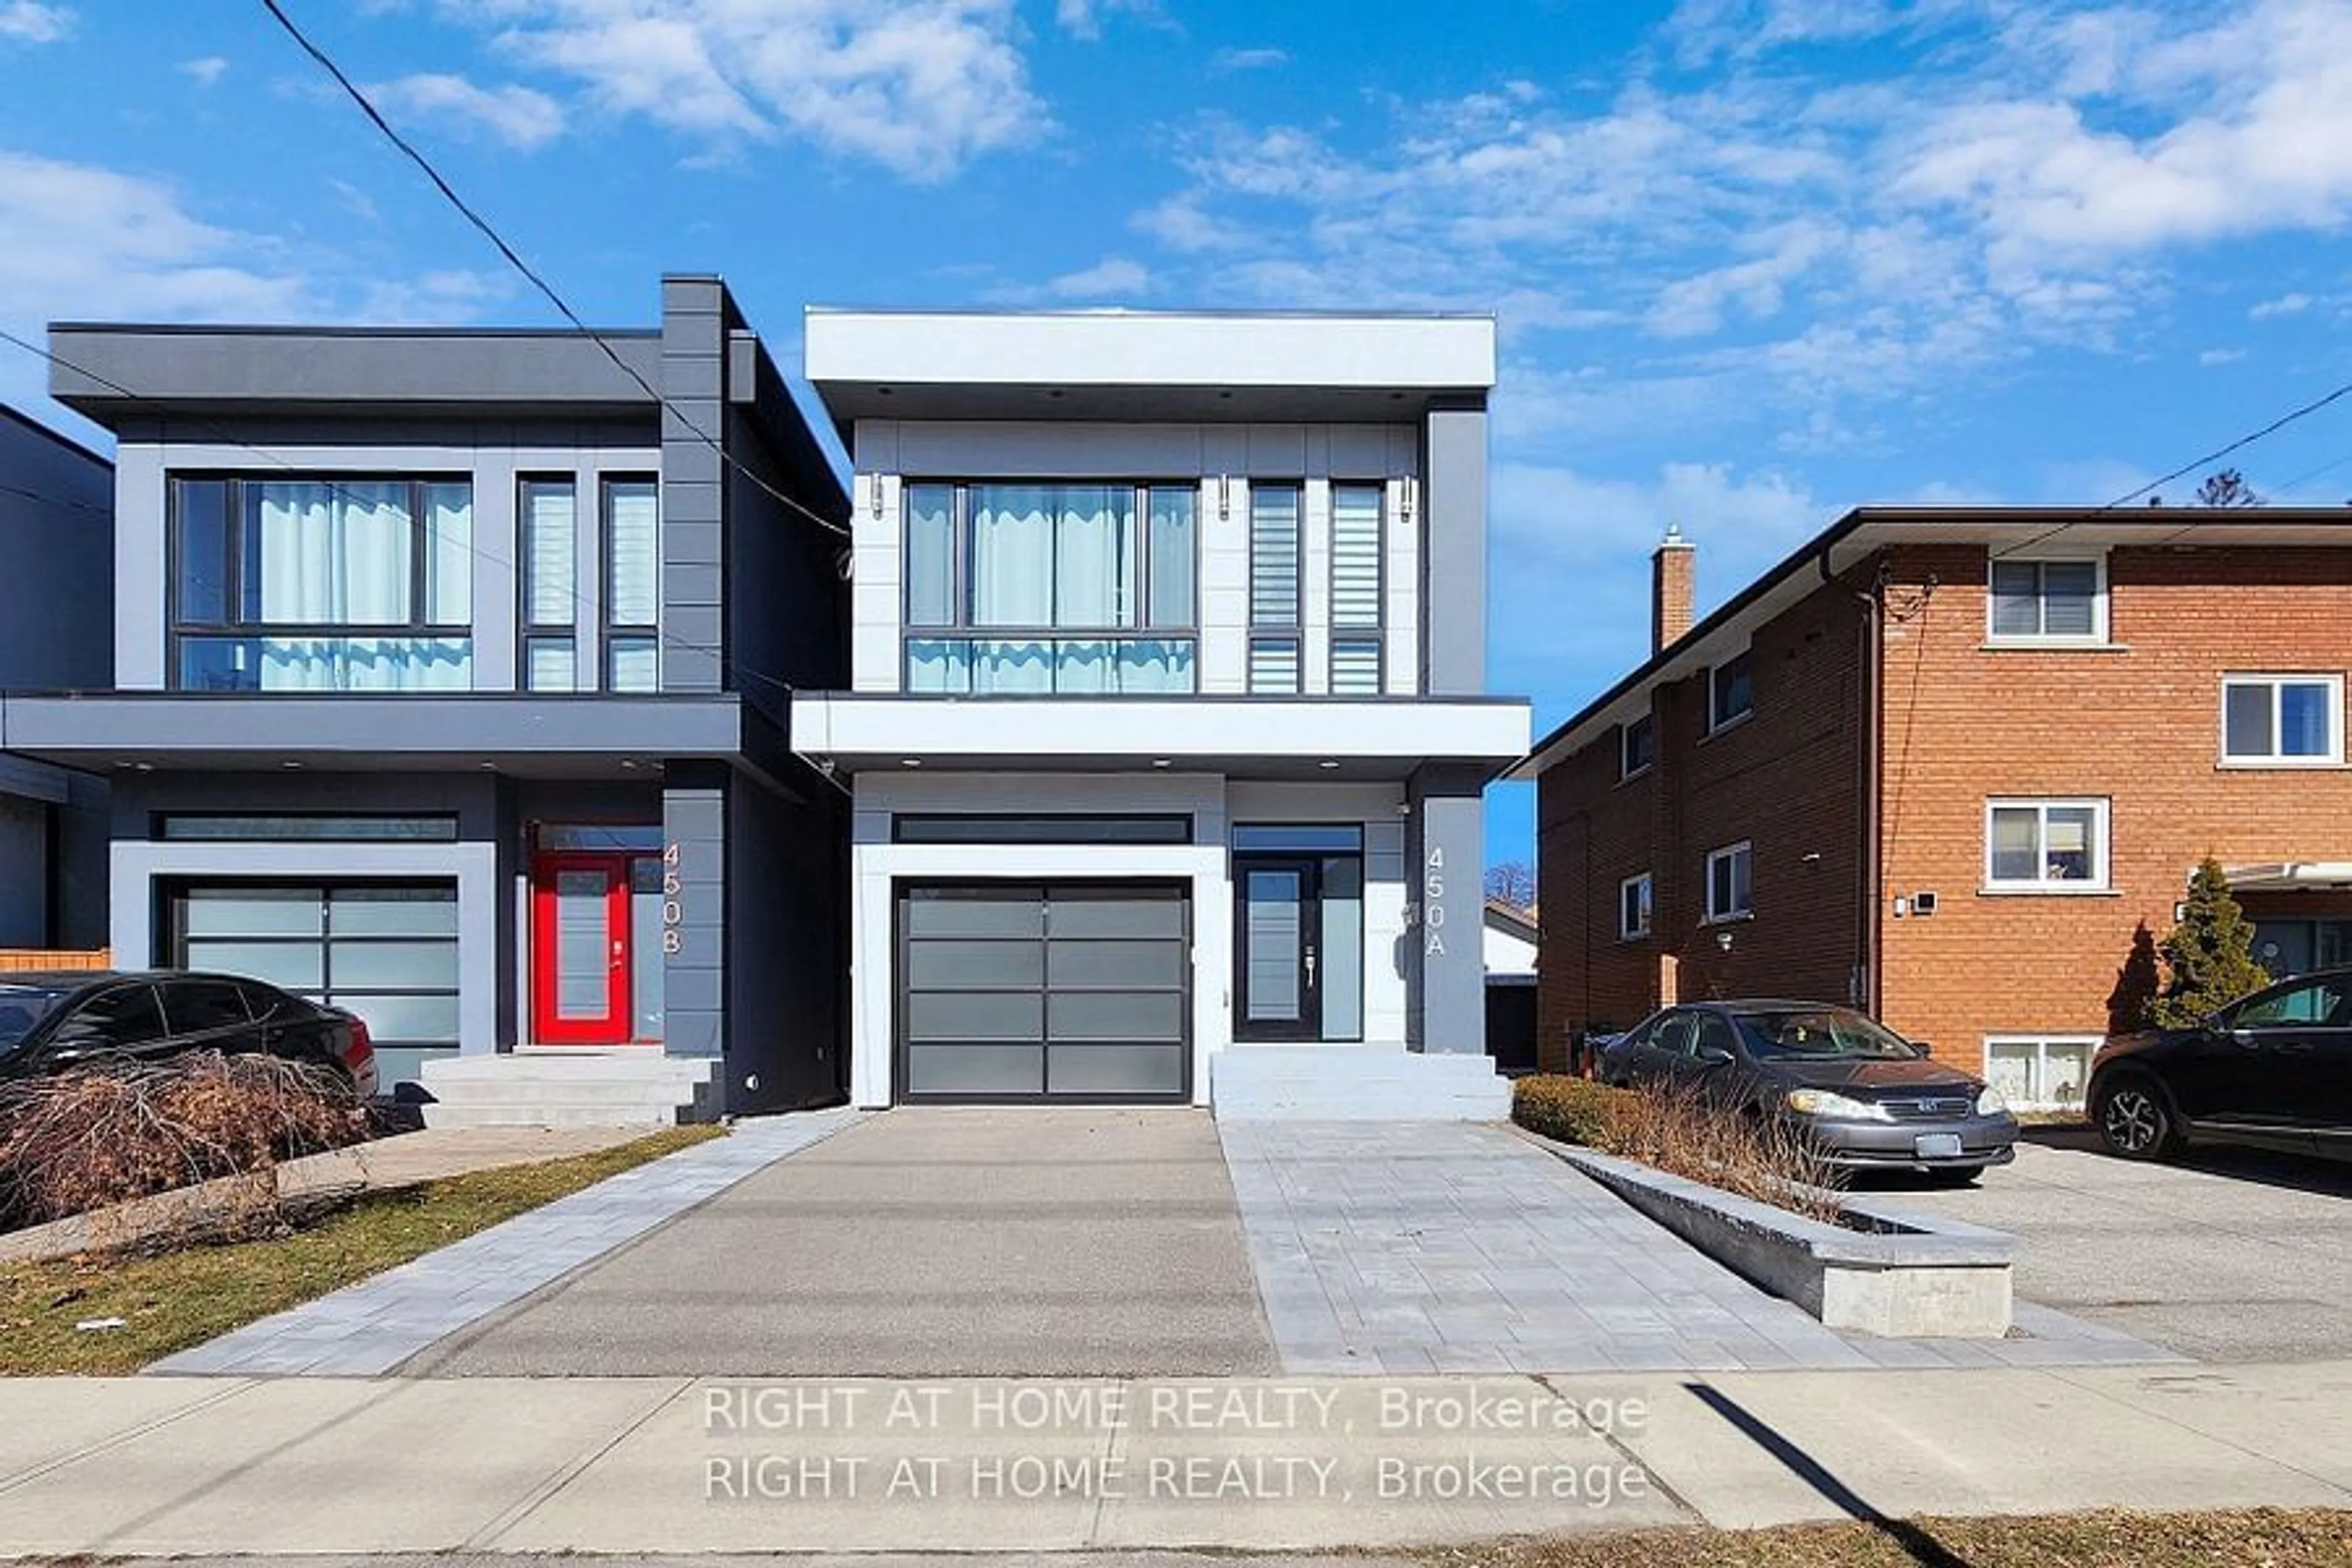 Home with brick exterior material for 450A Valermo Dr, Toronto Ontario M8W 2M4